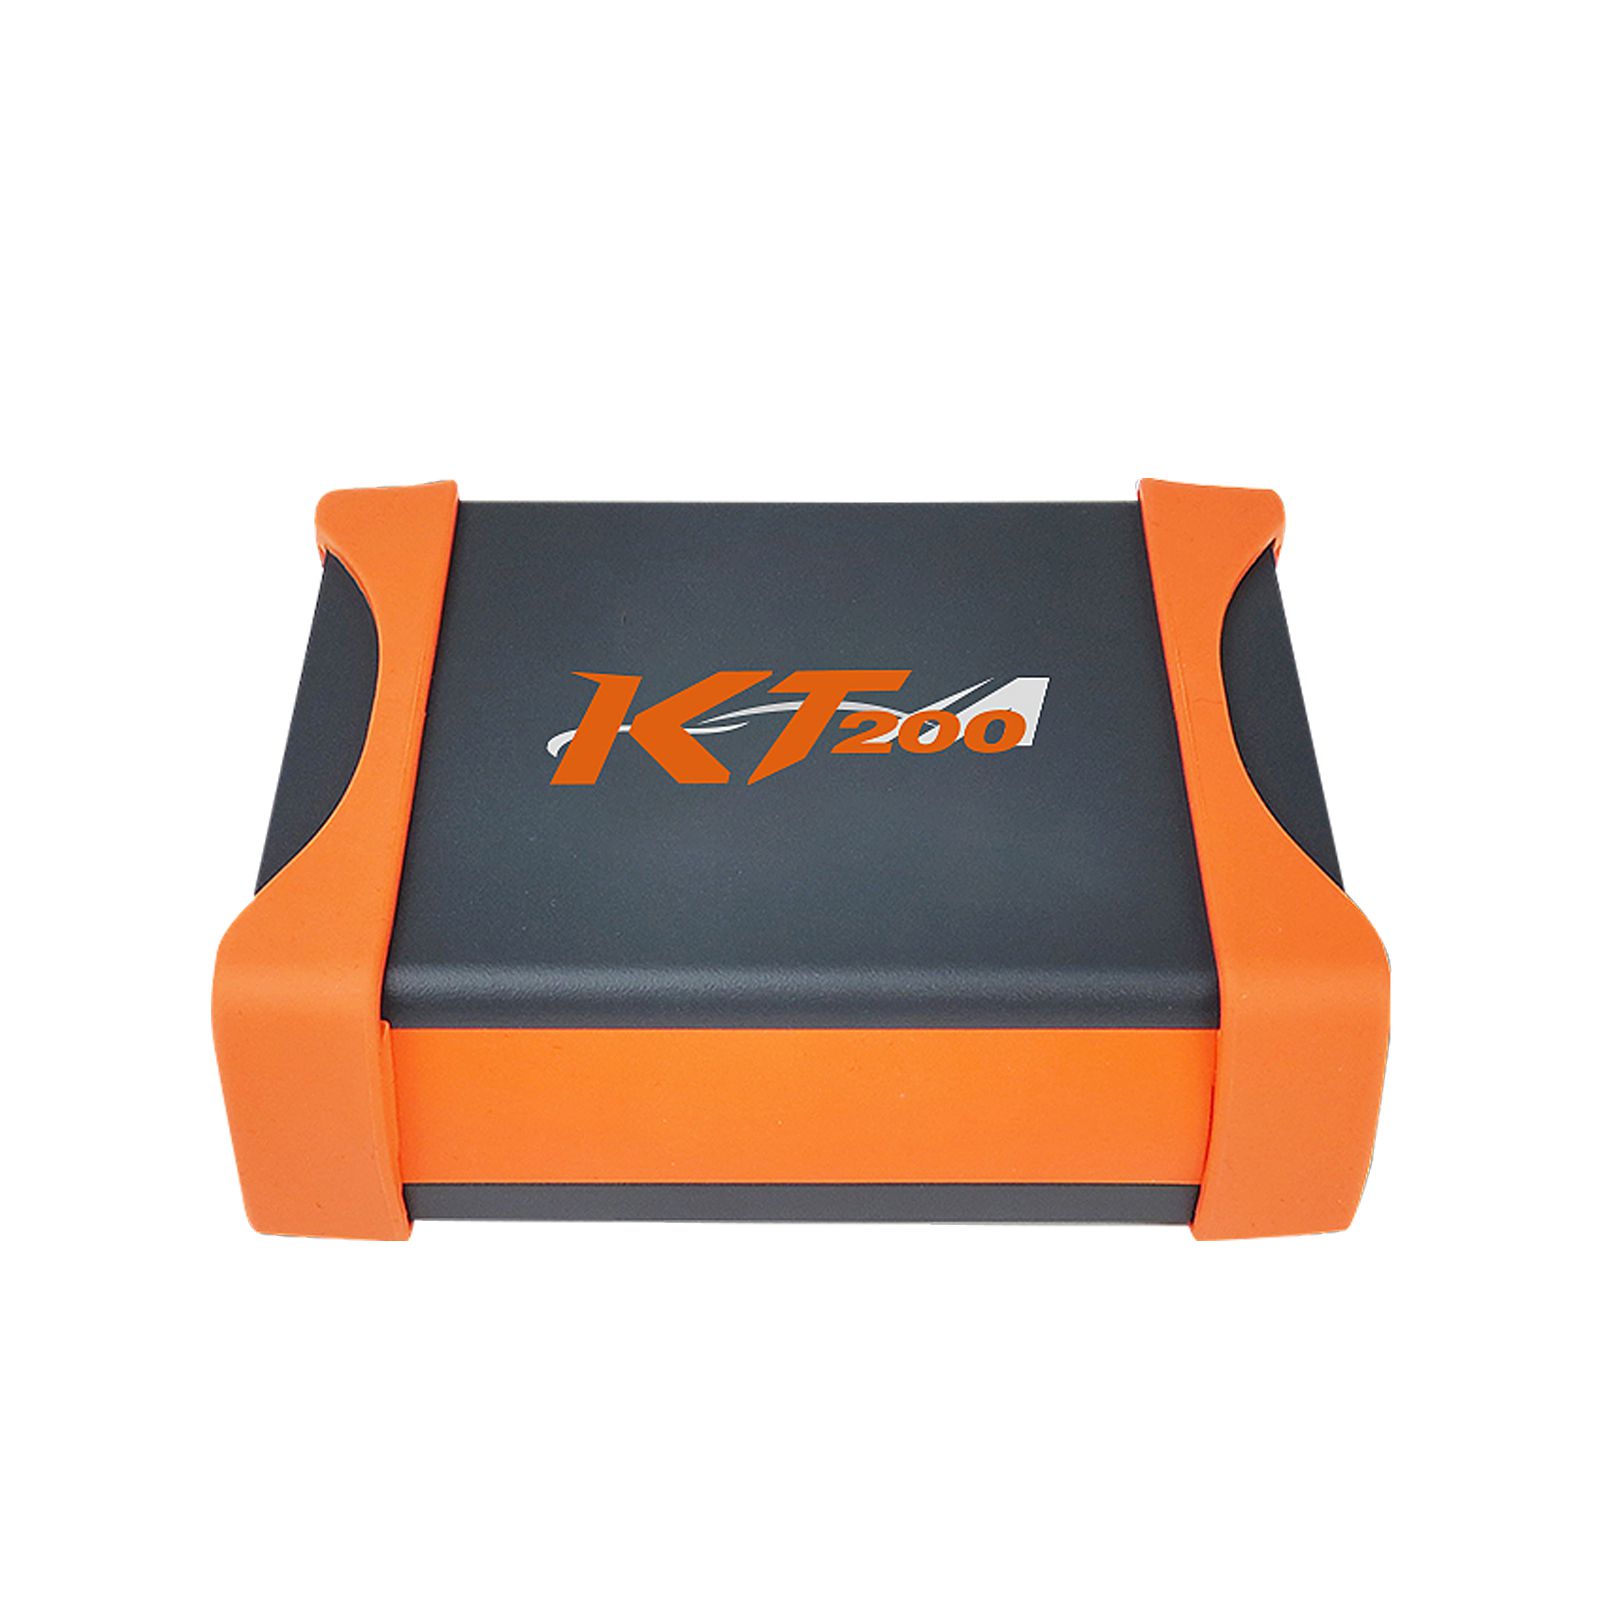 [Basic Promotion Version] KT200 Auto Diagnostic Tool Support ECU Maintenance Chip Tuning DTC Code Removal OBD/BOOT/BDM/JTAG